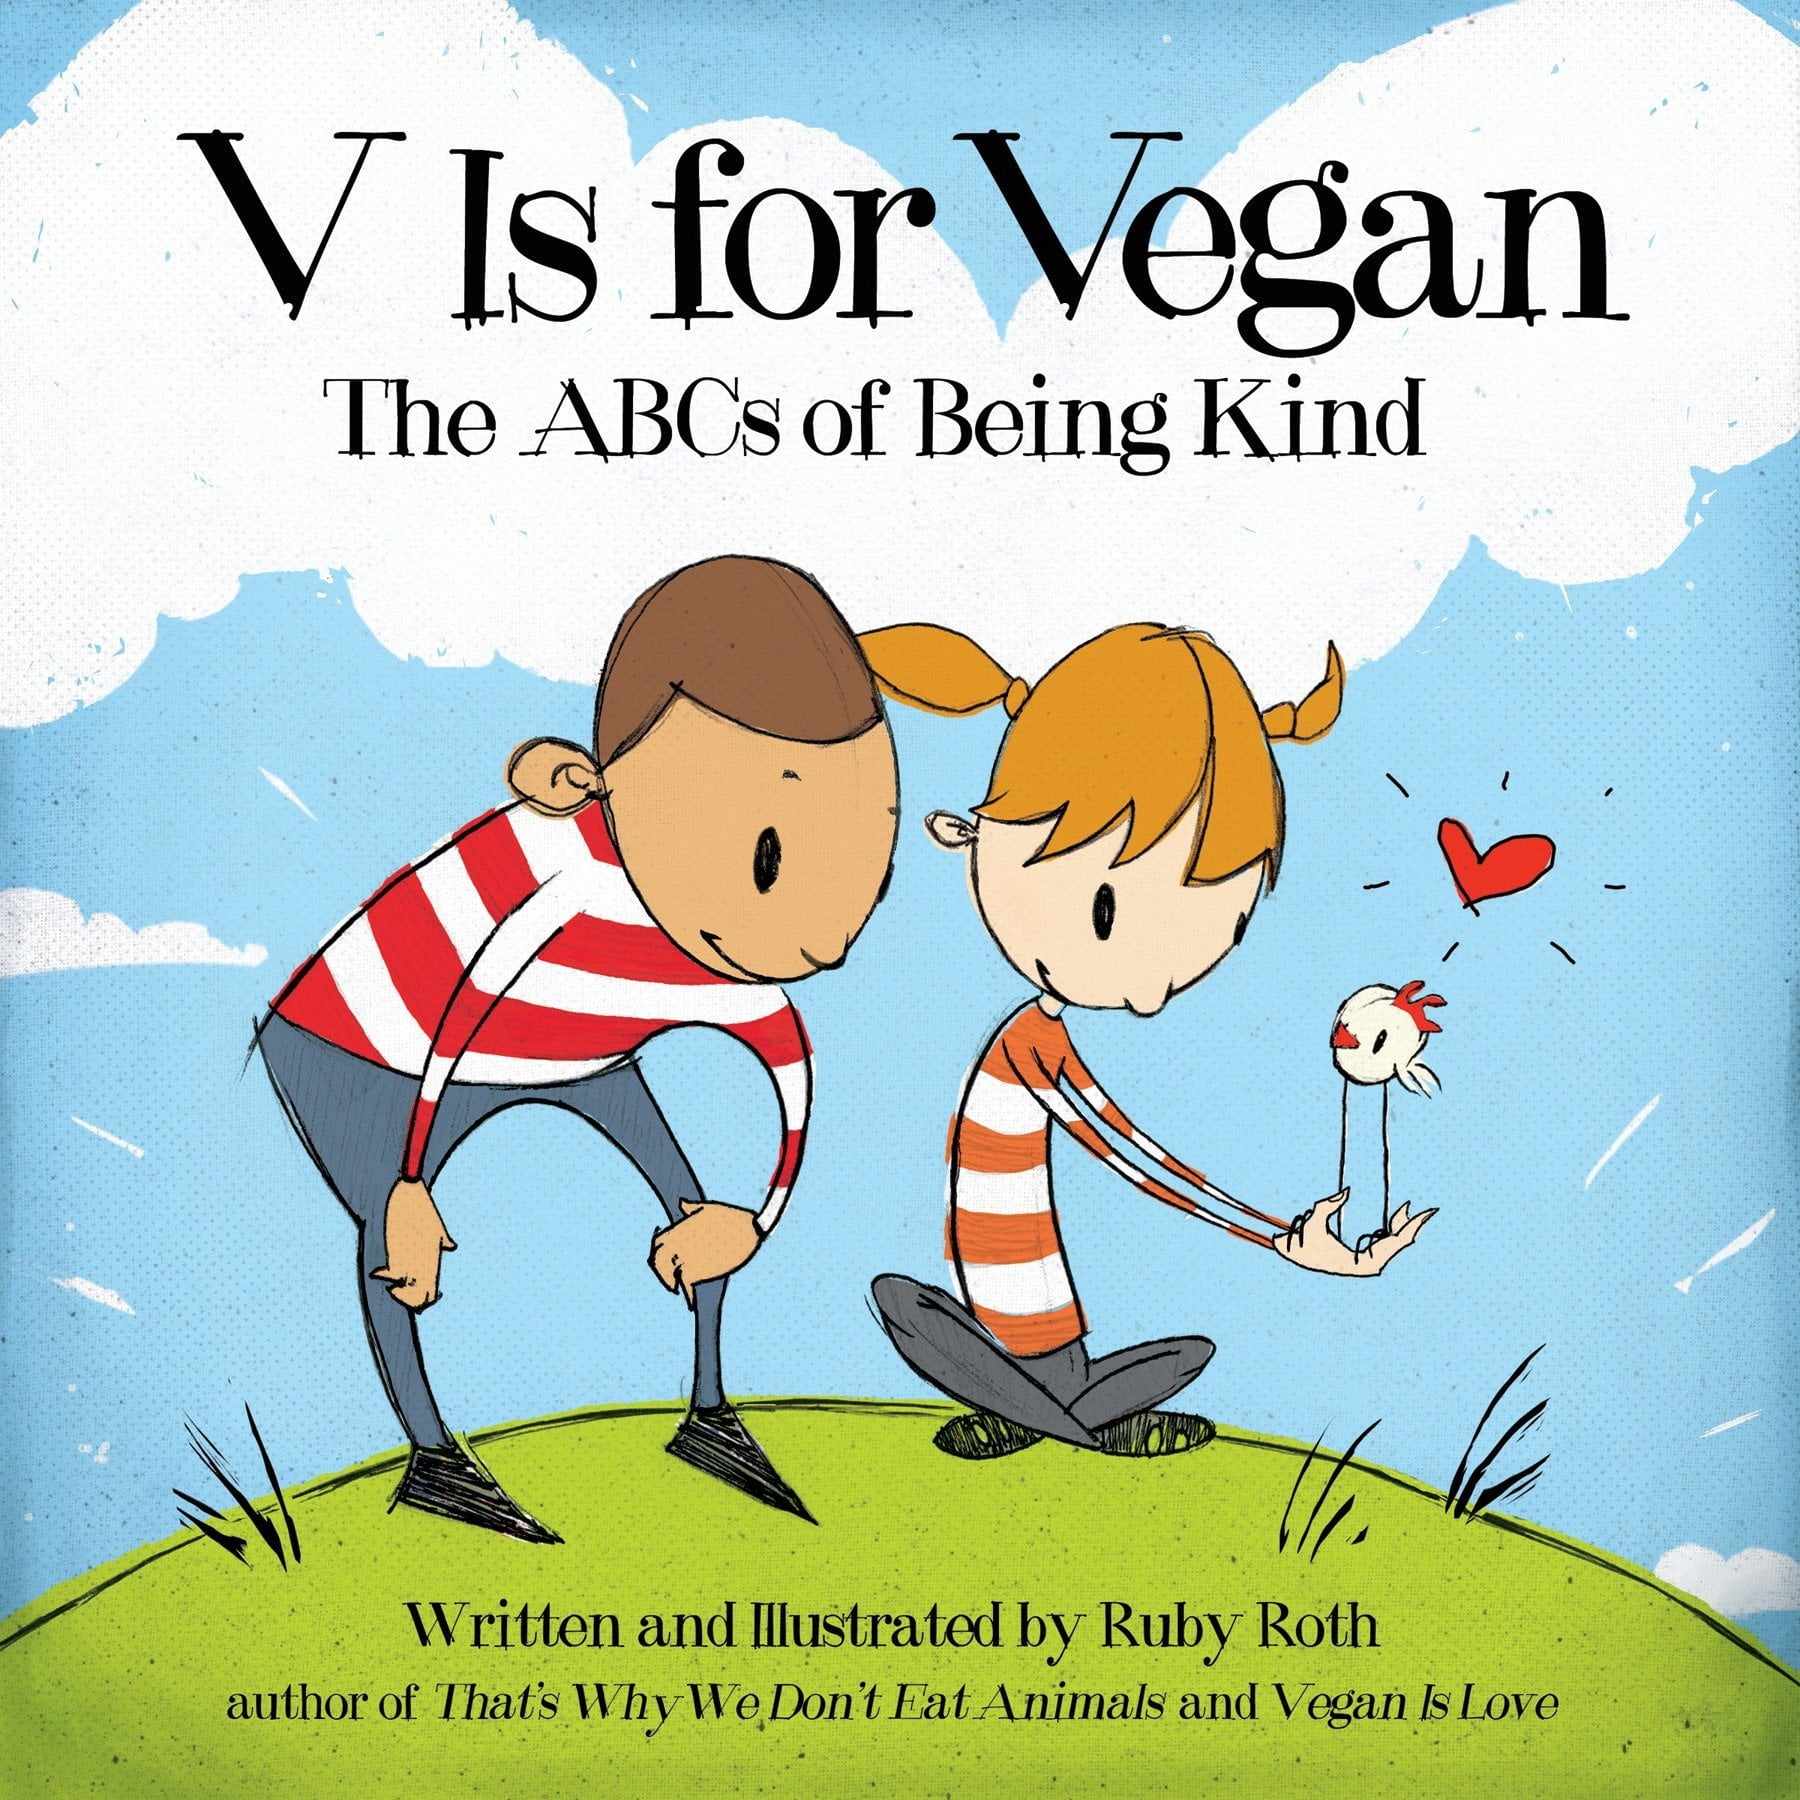 V is for Vegan- The ABCs of Being Kind